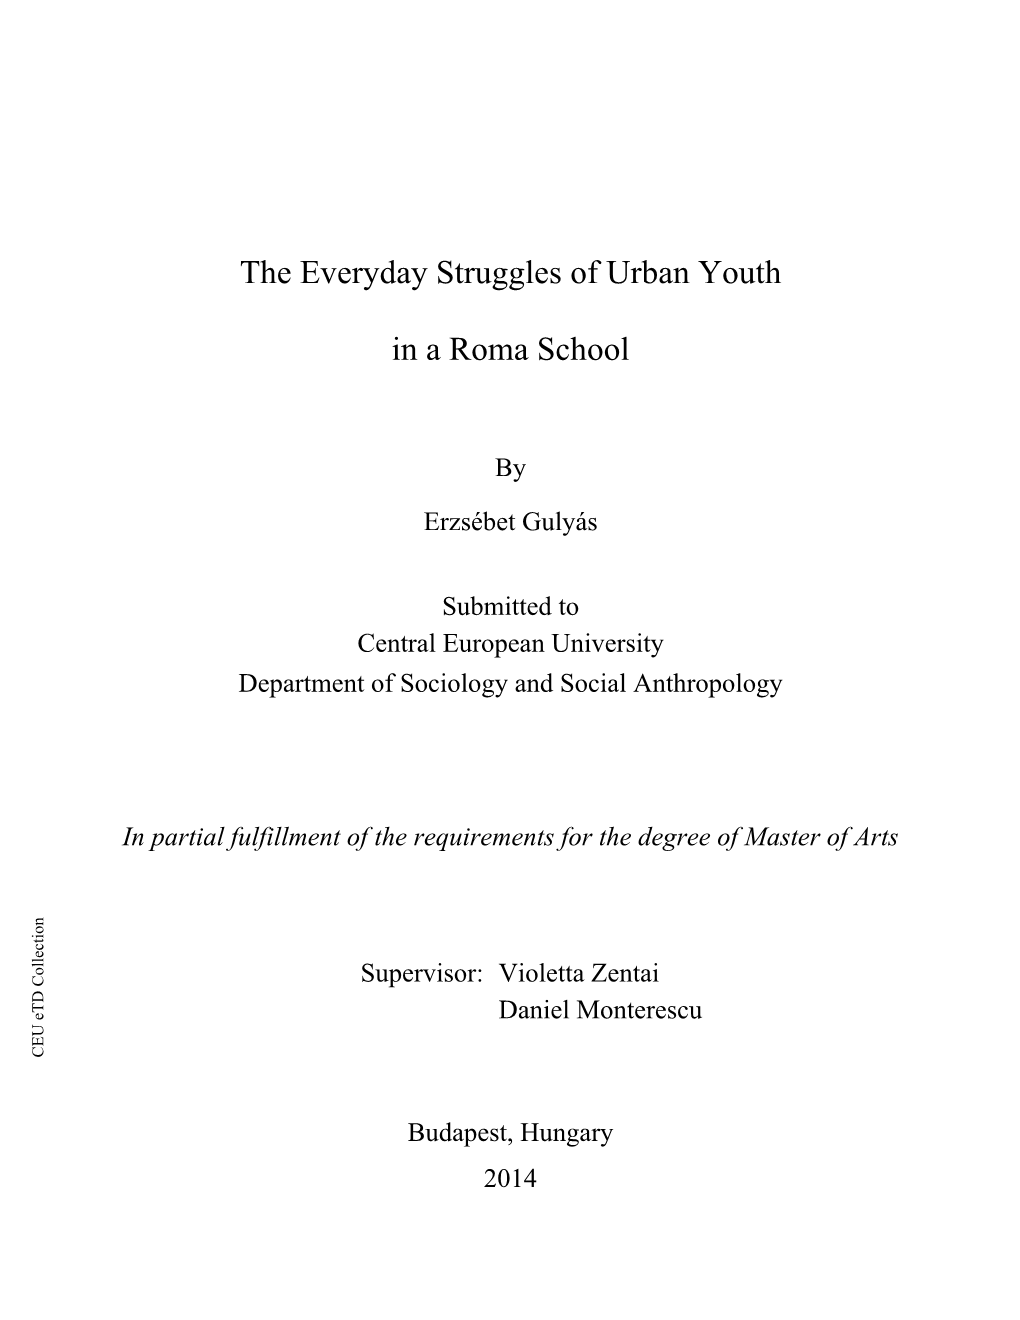 The Everyday Struggles of Urban Youth in a Roma School